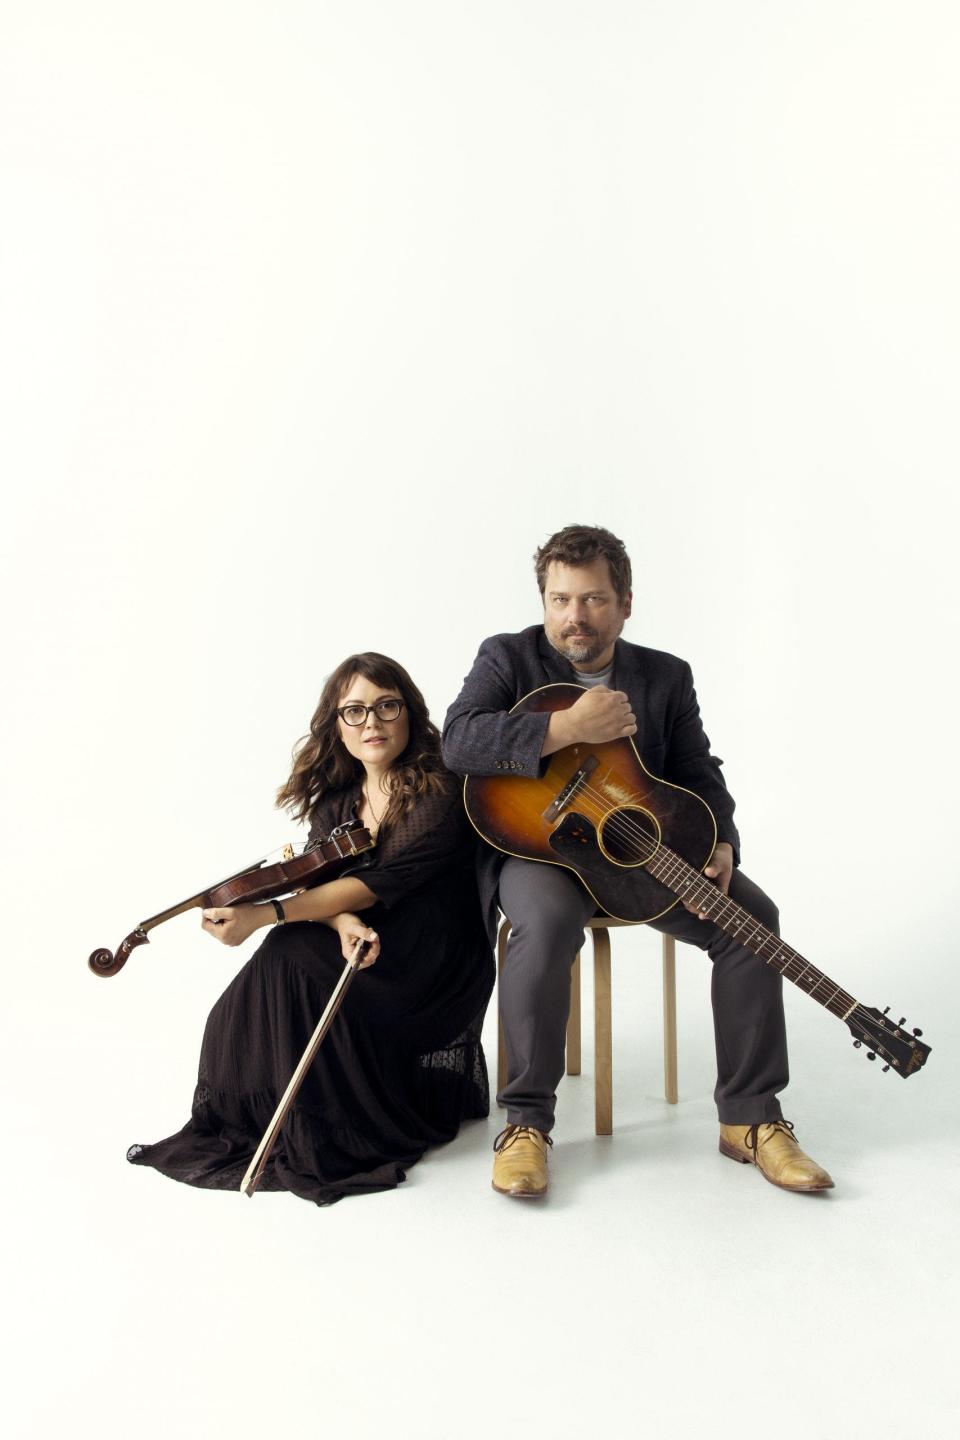 In addition to their solo careers and their sibling duo group Watkins Family Hour, Sara and Sean Watkins also are members of Nickel Creek with Chris Thile, and Sean says the trio is at work on a new album, their first since 2014.